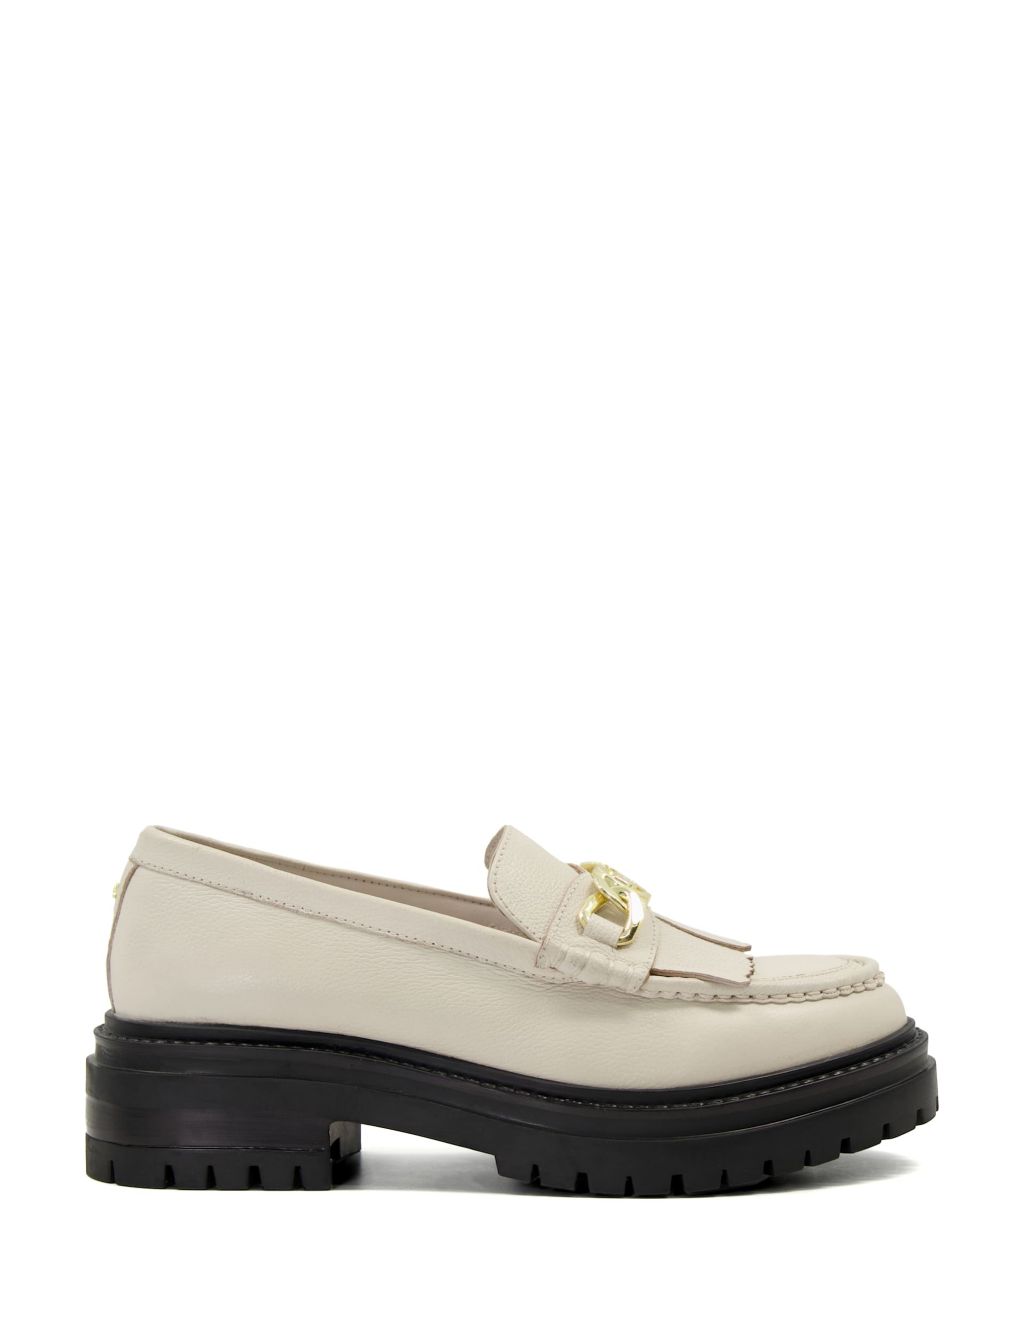 Leather Chunky Chain Detail Loafers image 1